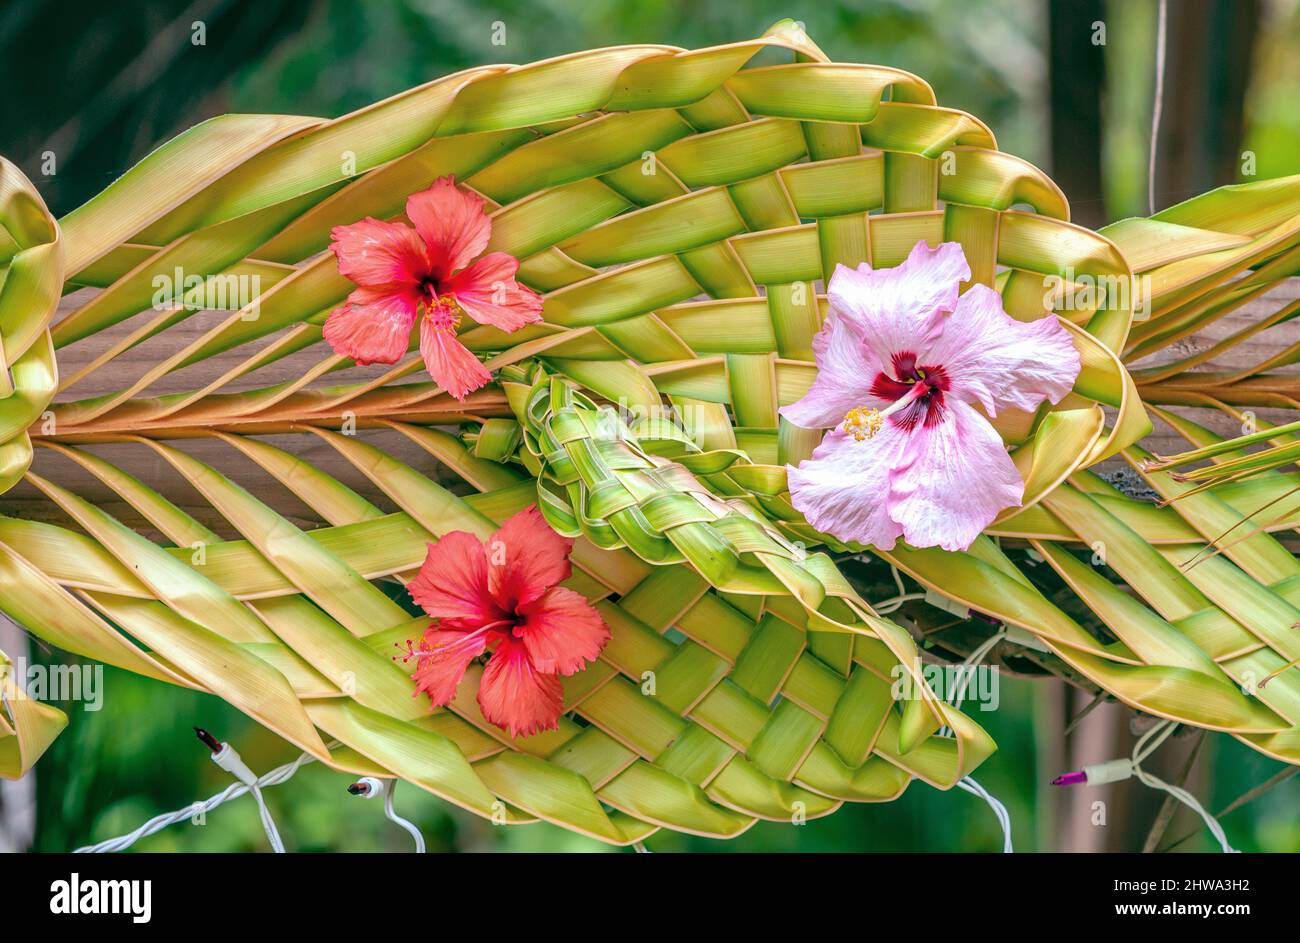 Closeup of a Polynesian style decoration made of braided palm leaves and hibiscus flowers at Bora Bora Island, French Polynesia Stock Photo